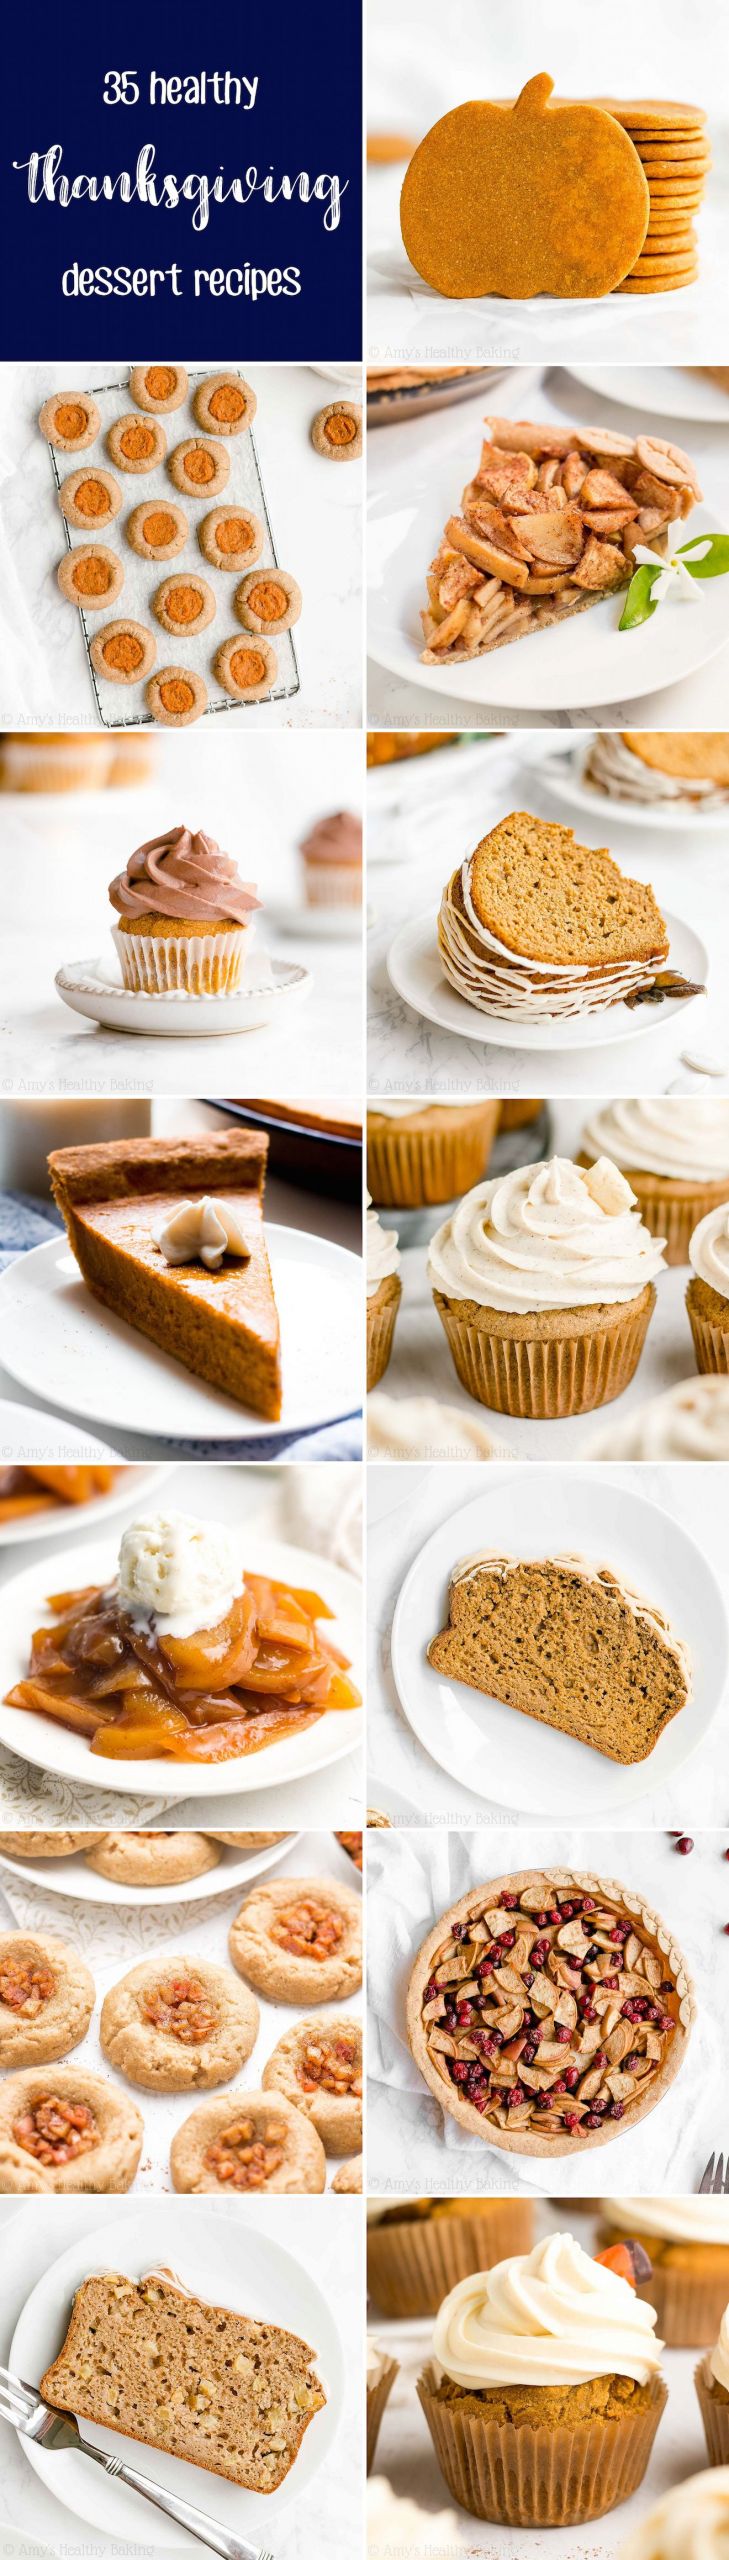 Low Calorie Thanksgiving Desserts
 35 Healthy Thanksgiving Dessert Recipes They re all under